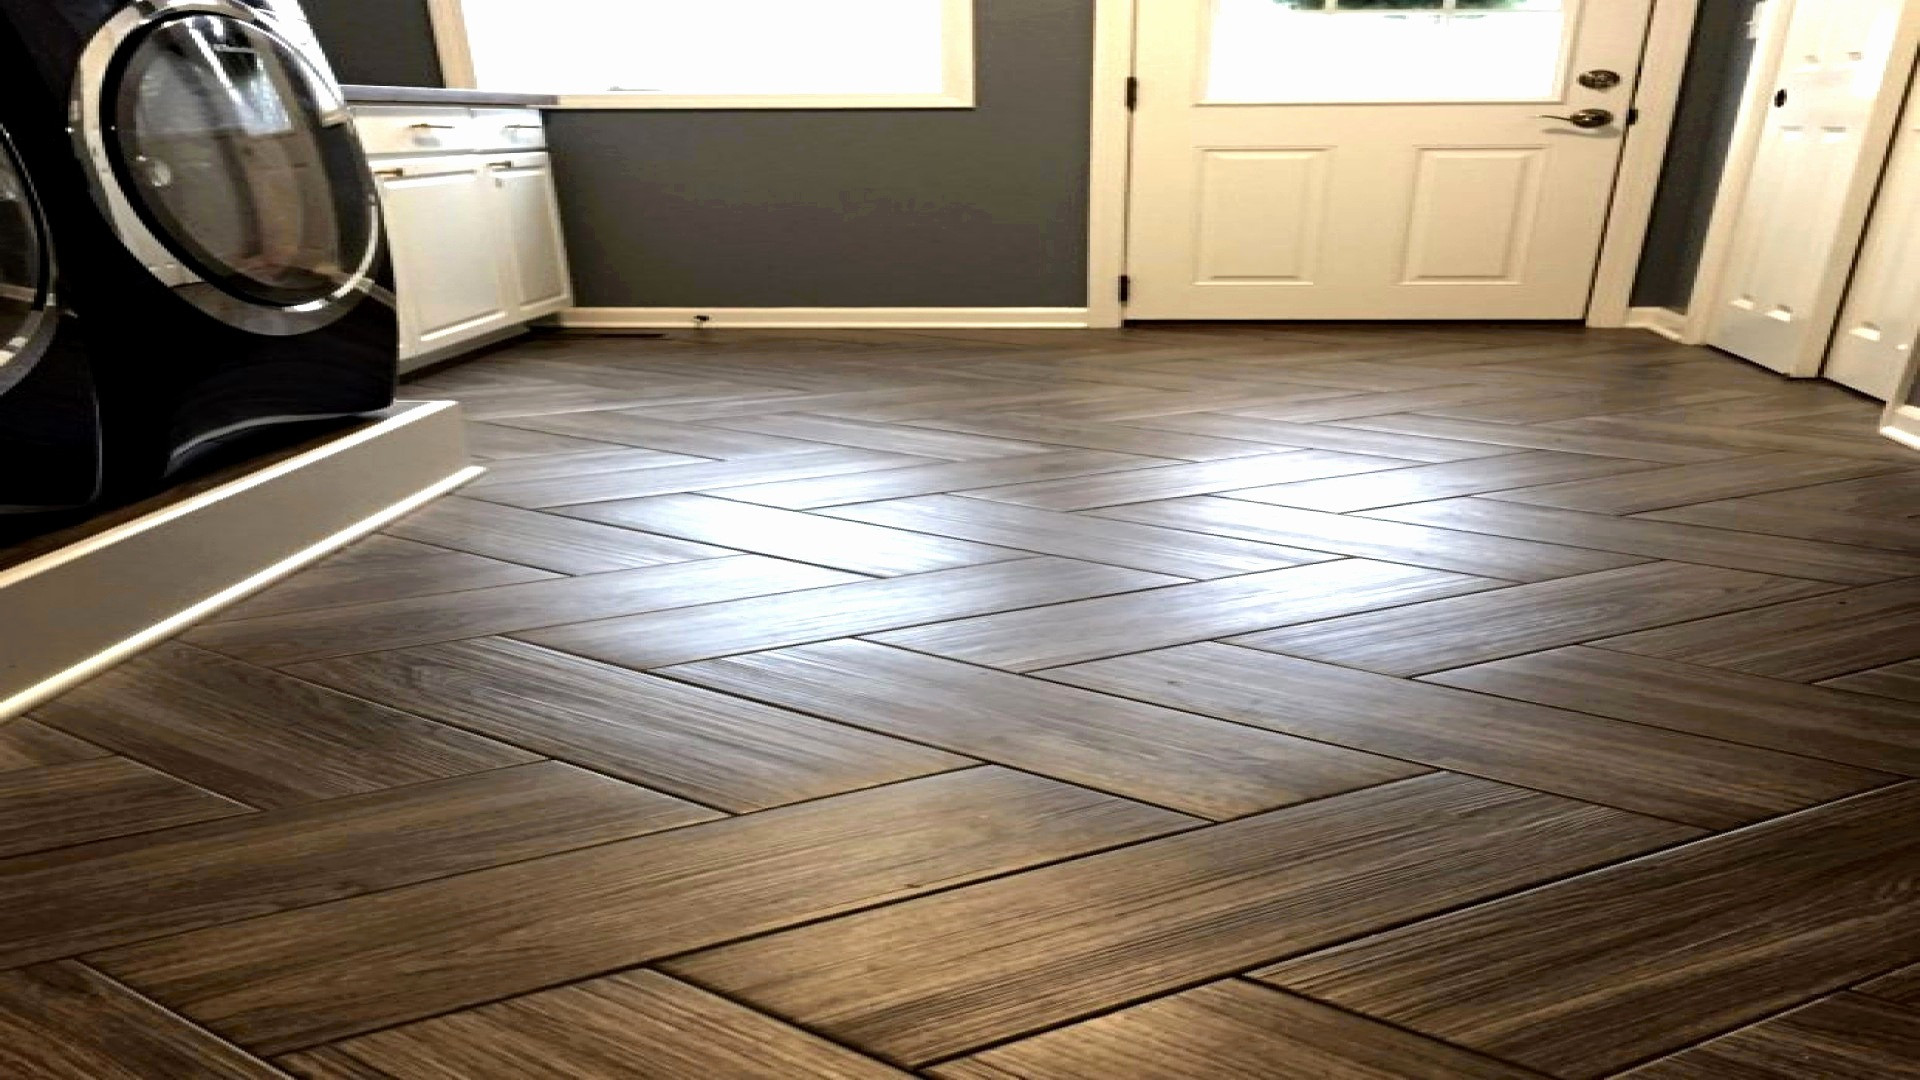 24 Spectacular Hardwood Floor Vs Carpet Home Value 2024 free download hardwood floor vs carpet home value of flooring design ideas find ideas and inspiration for flooring within wpc vinyl flooring lovely 52 awesome wood plank flooring 52 s image